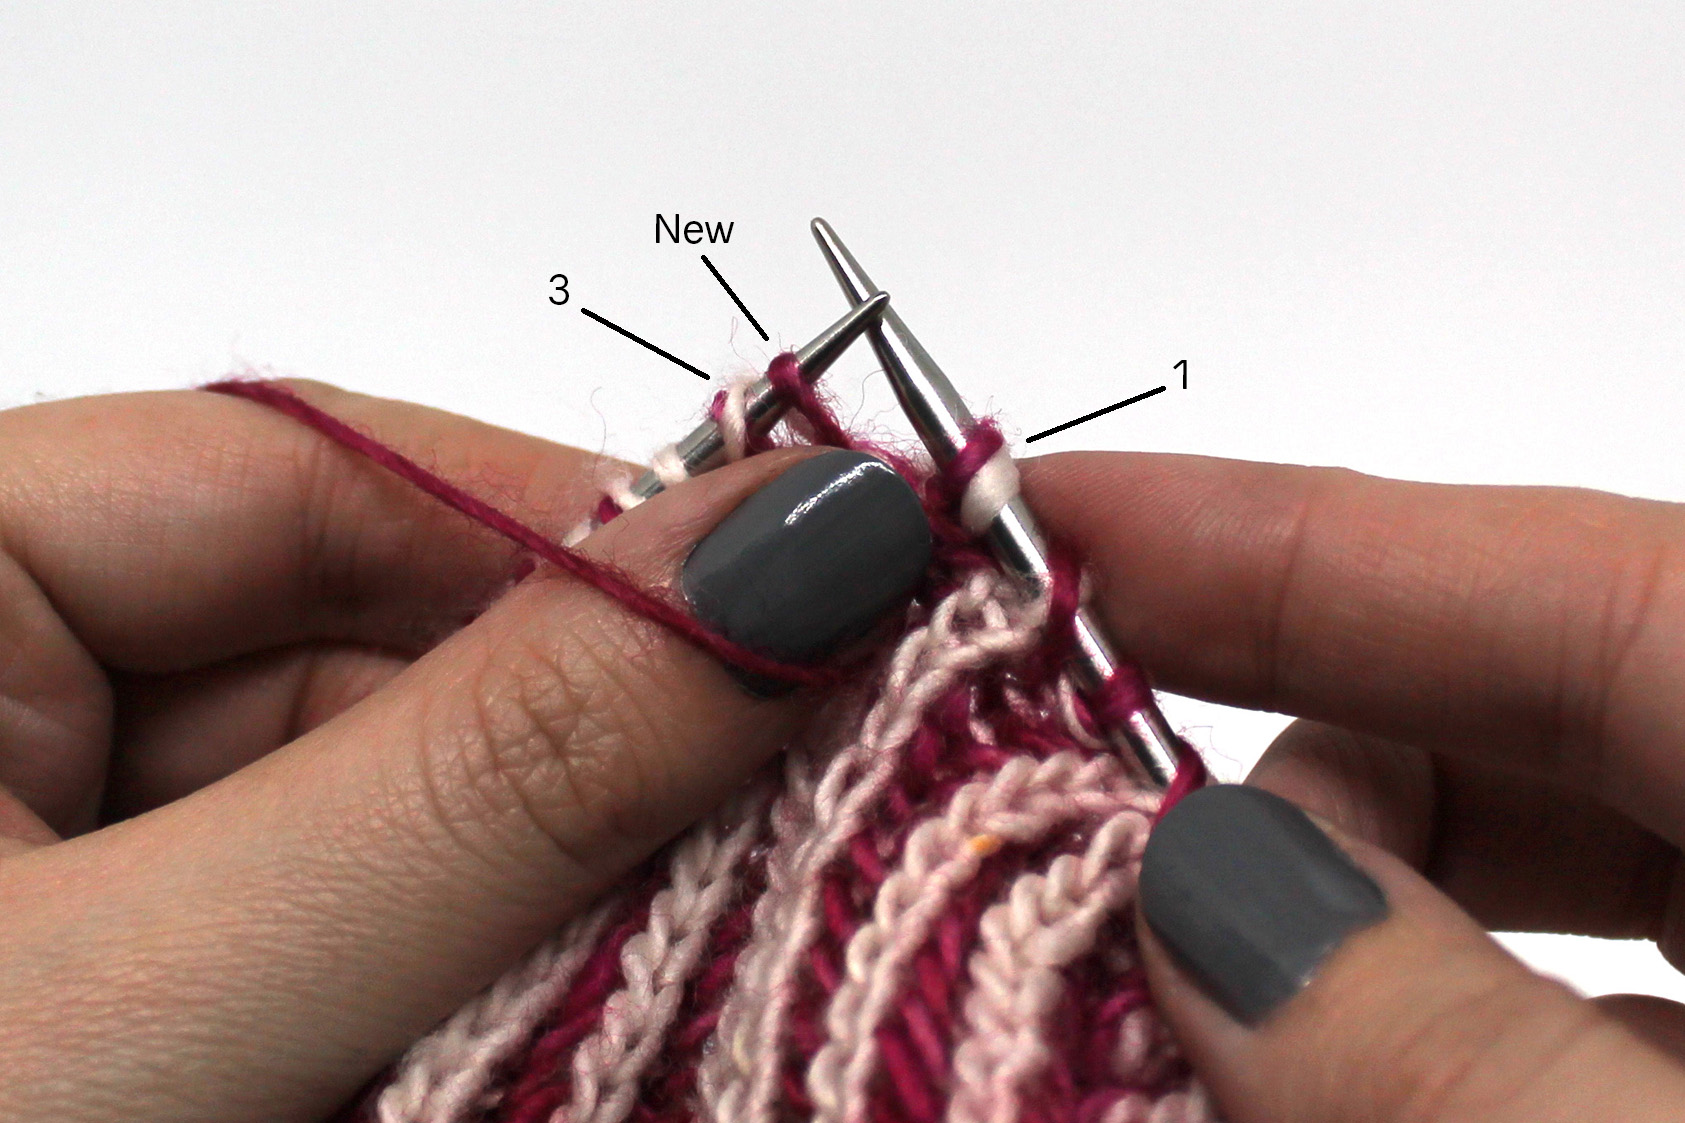 Stitch, 3 then "new" have been slipped to the left hand needle